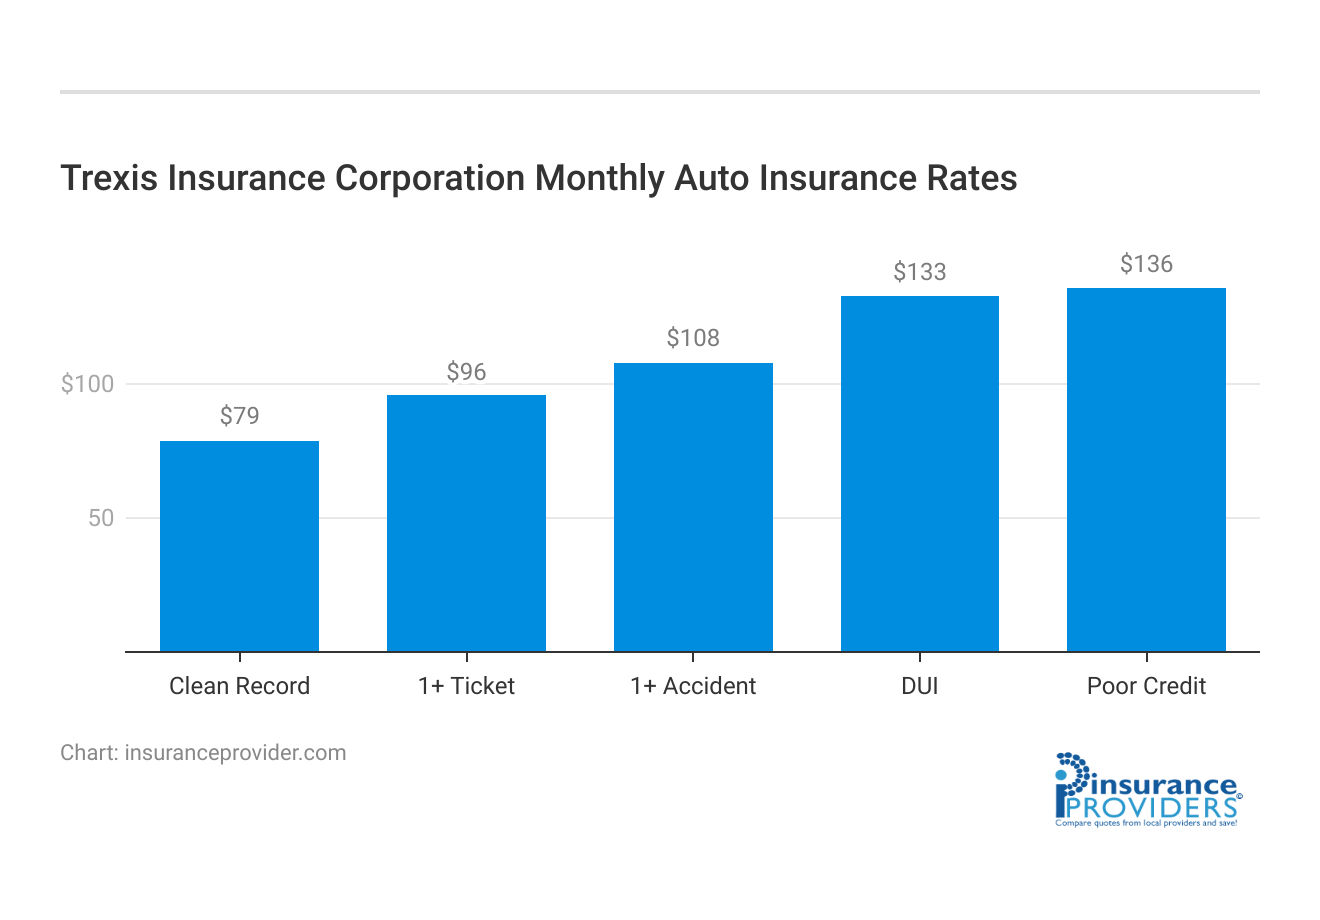 <h3>Trexis Insurance Corporation Monthly Auto Insurance Rates</h3>